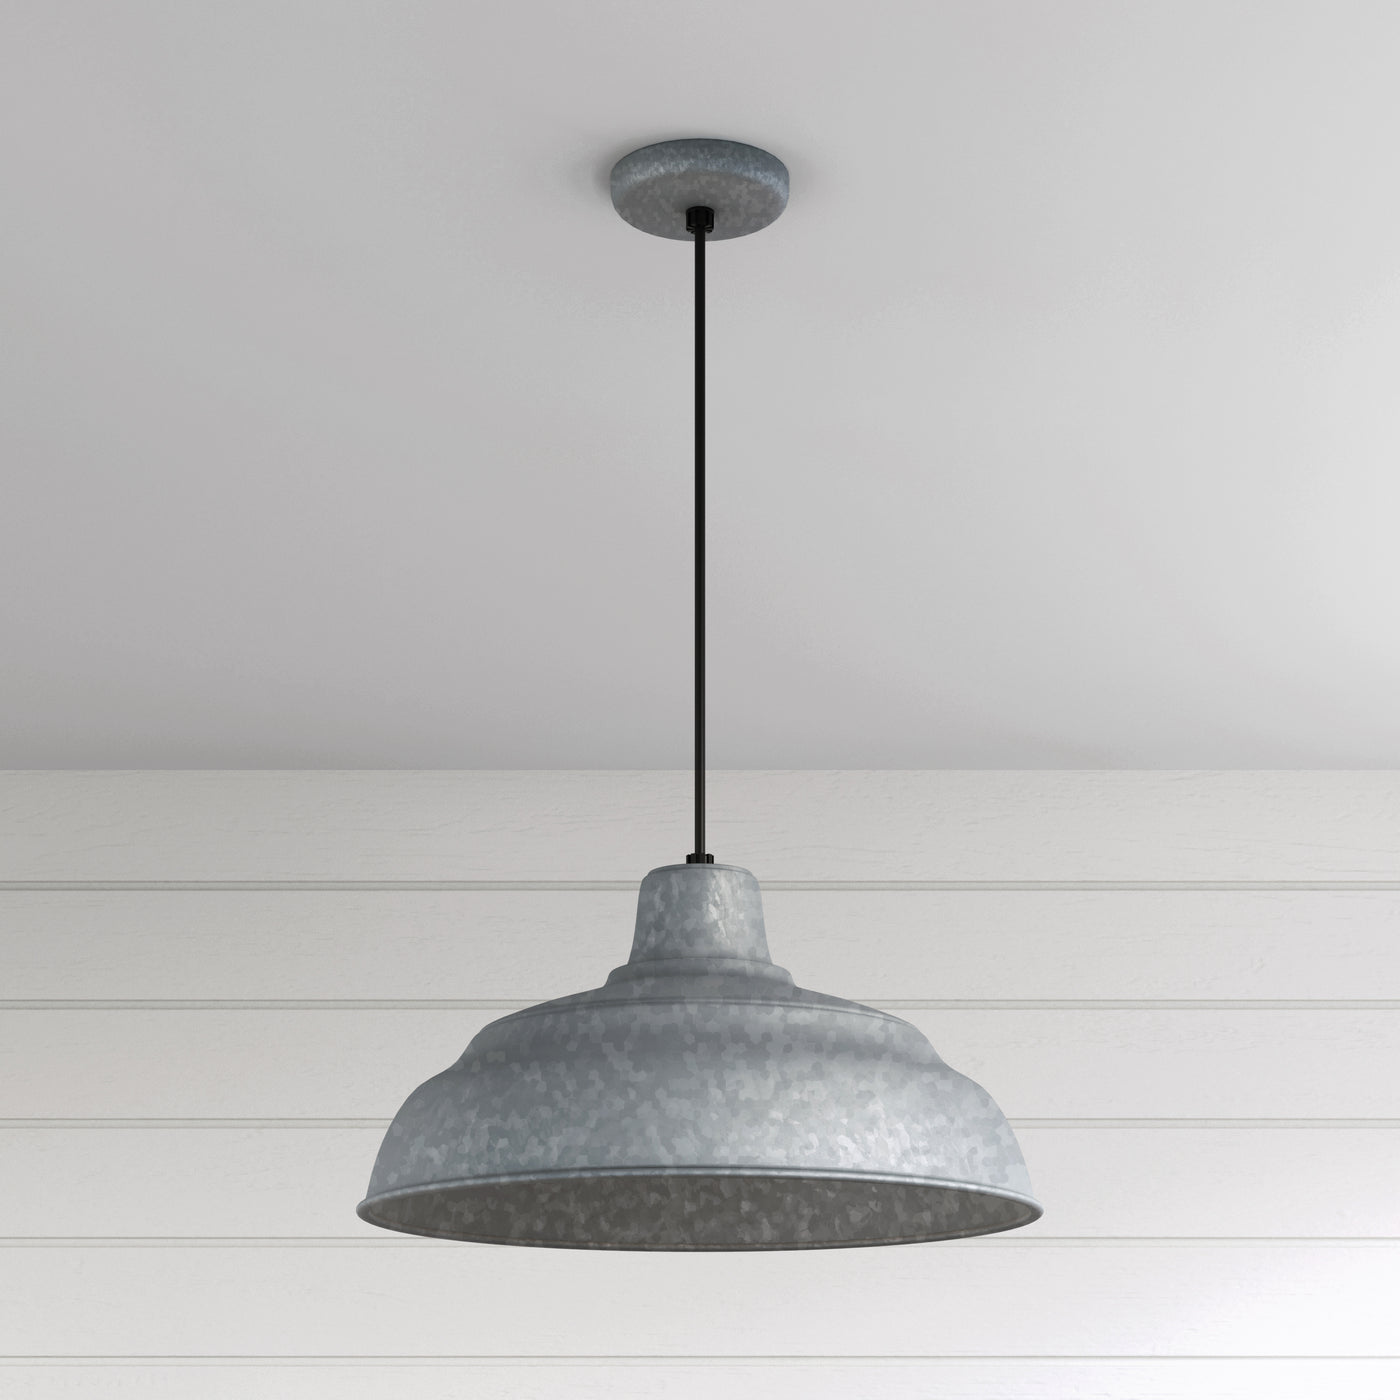 Millennium Lighting 17" RLM Warehouse Cord Hung Pendant (Available in Bronze, Galvanized, Black, Red, Green and White Finishes)